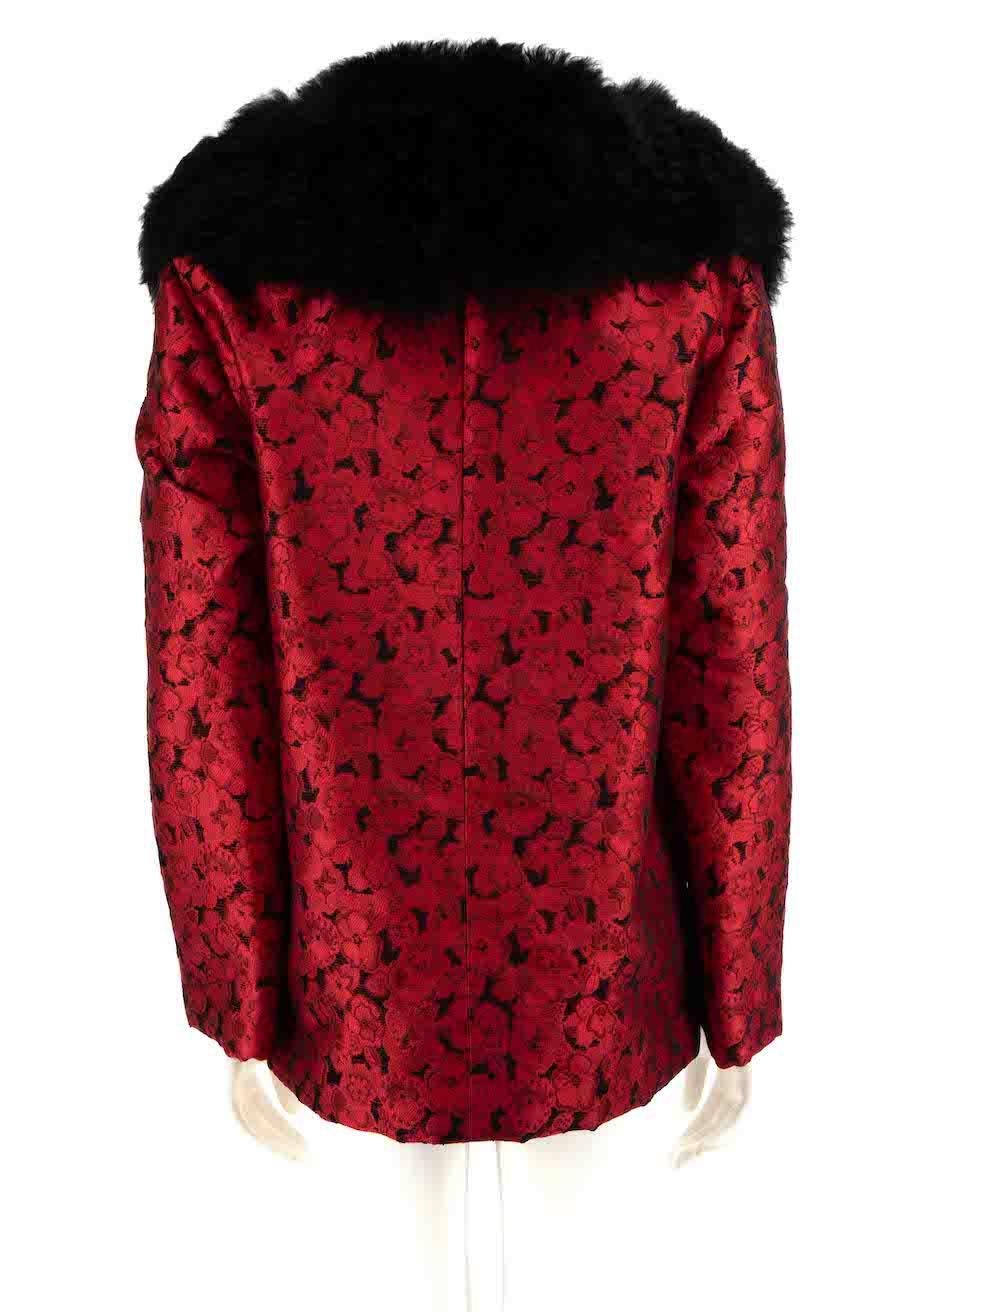 Dolce & Gabbana Red Floral Jacquard Jacket Size M In New Condition For Sale In London, GB